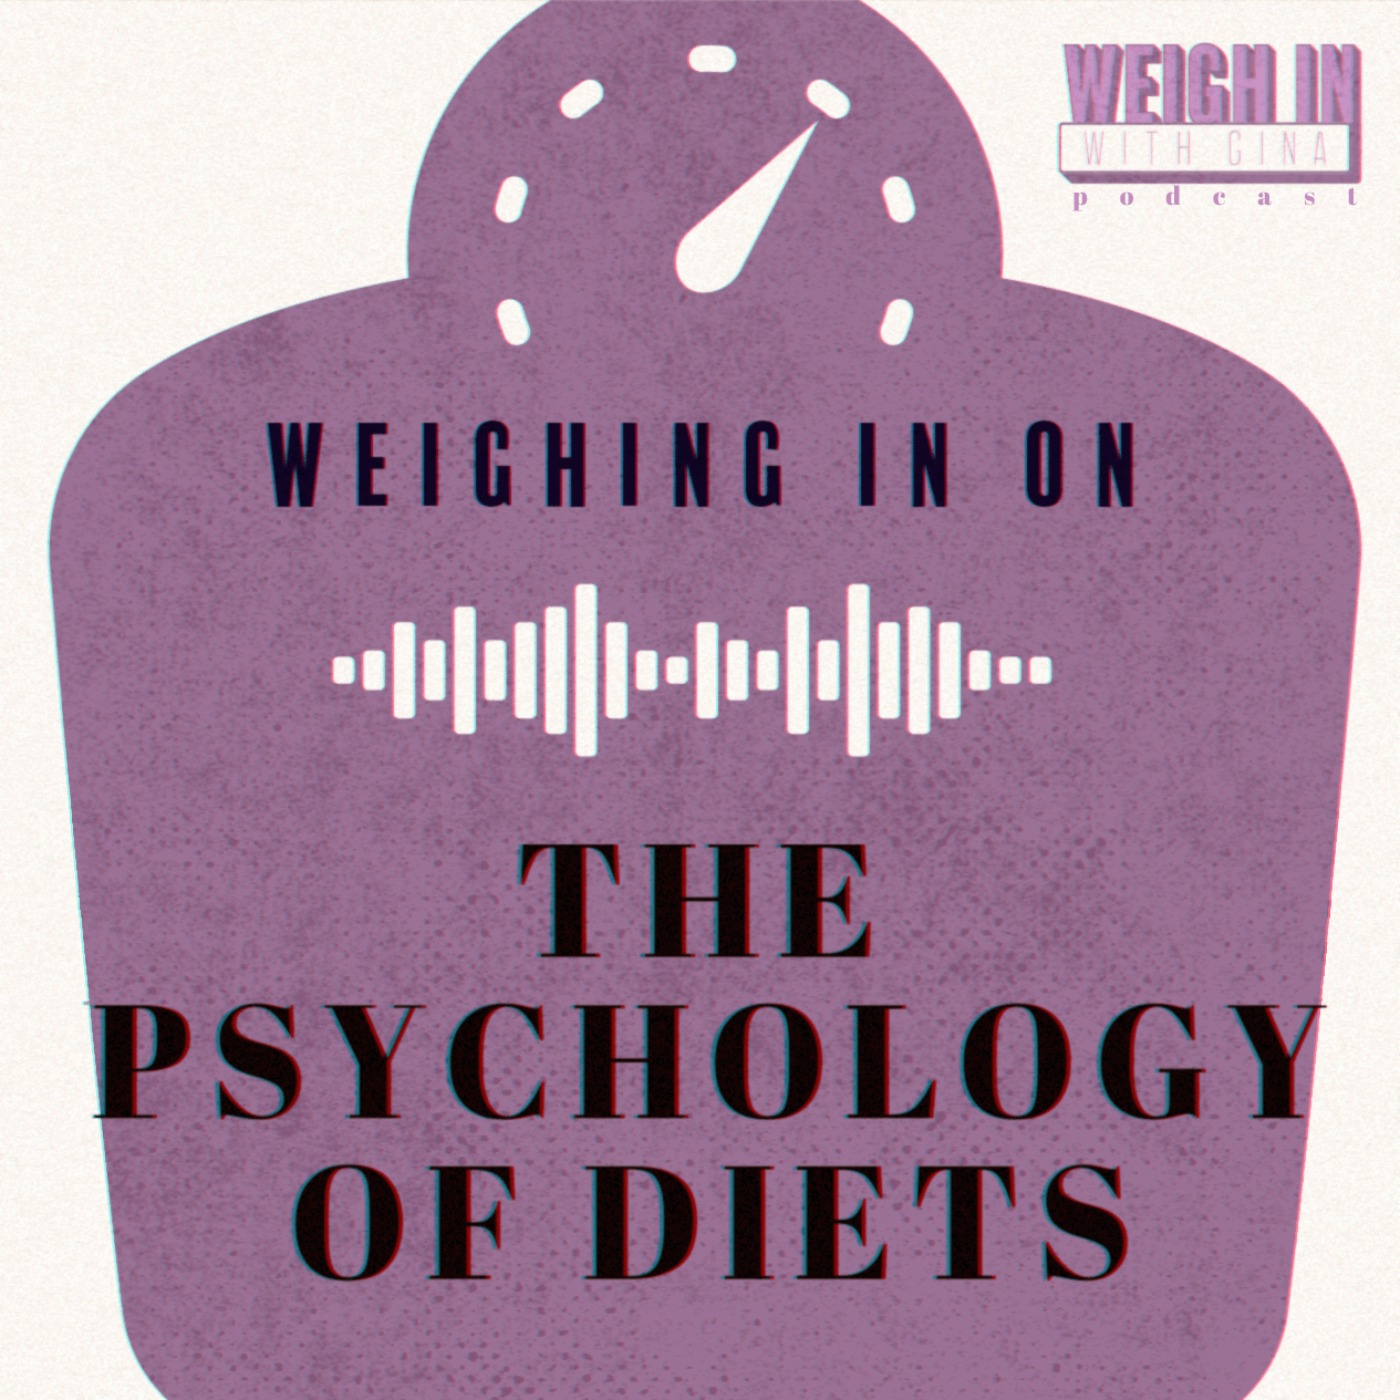 The Psychology of Diets